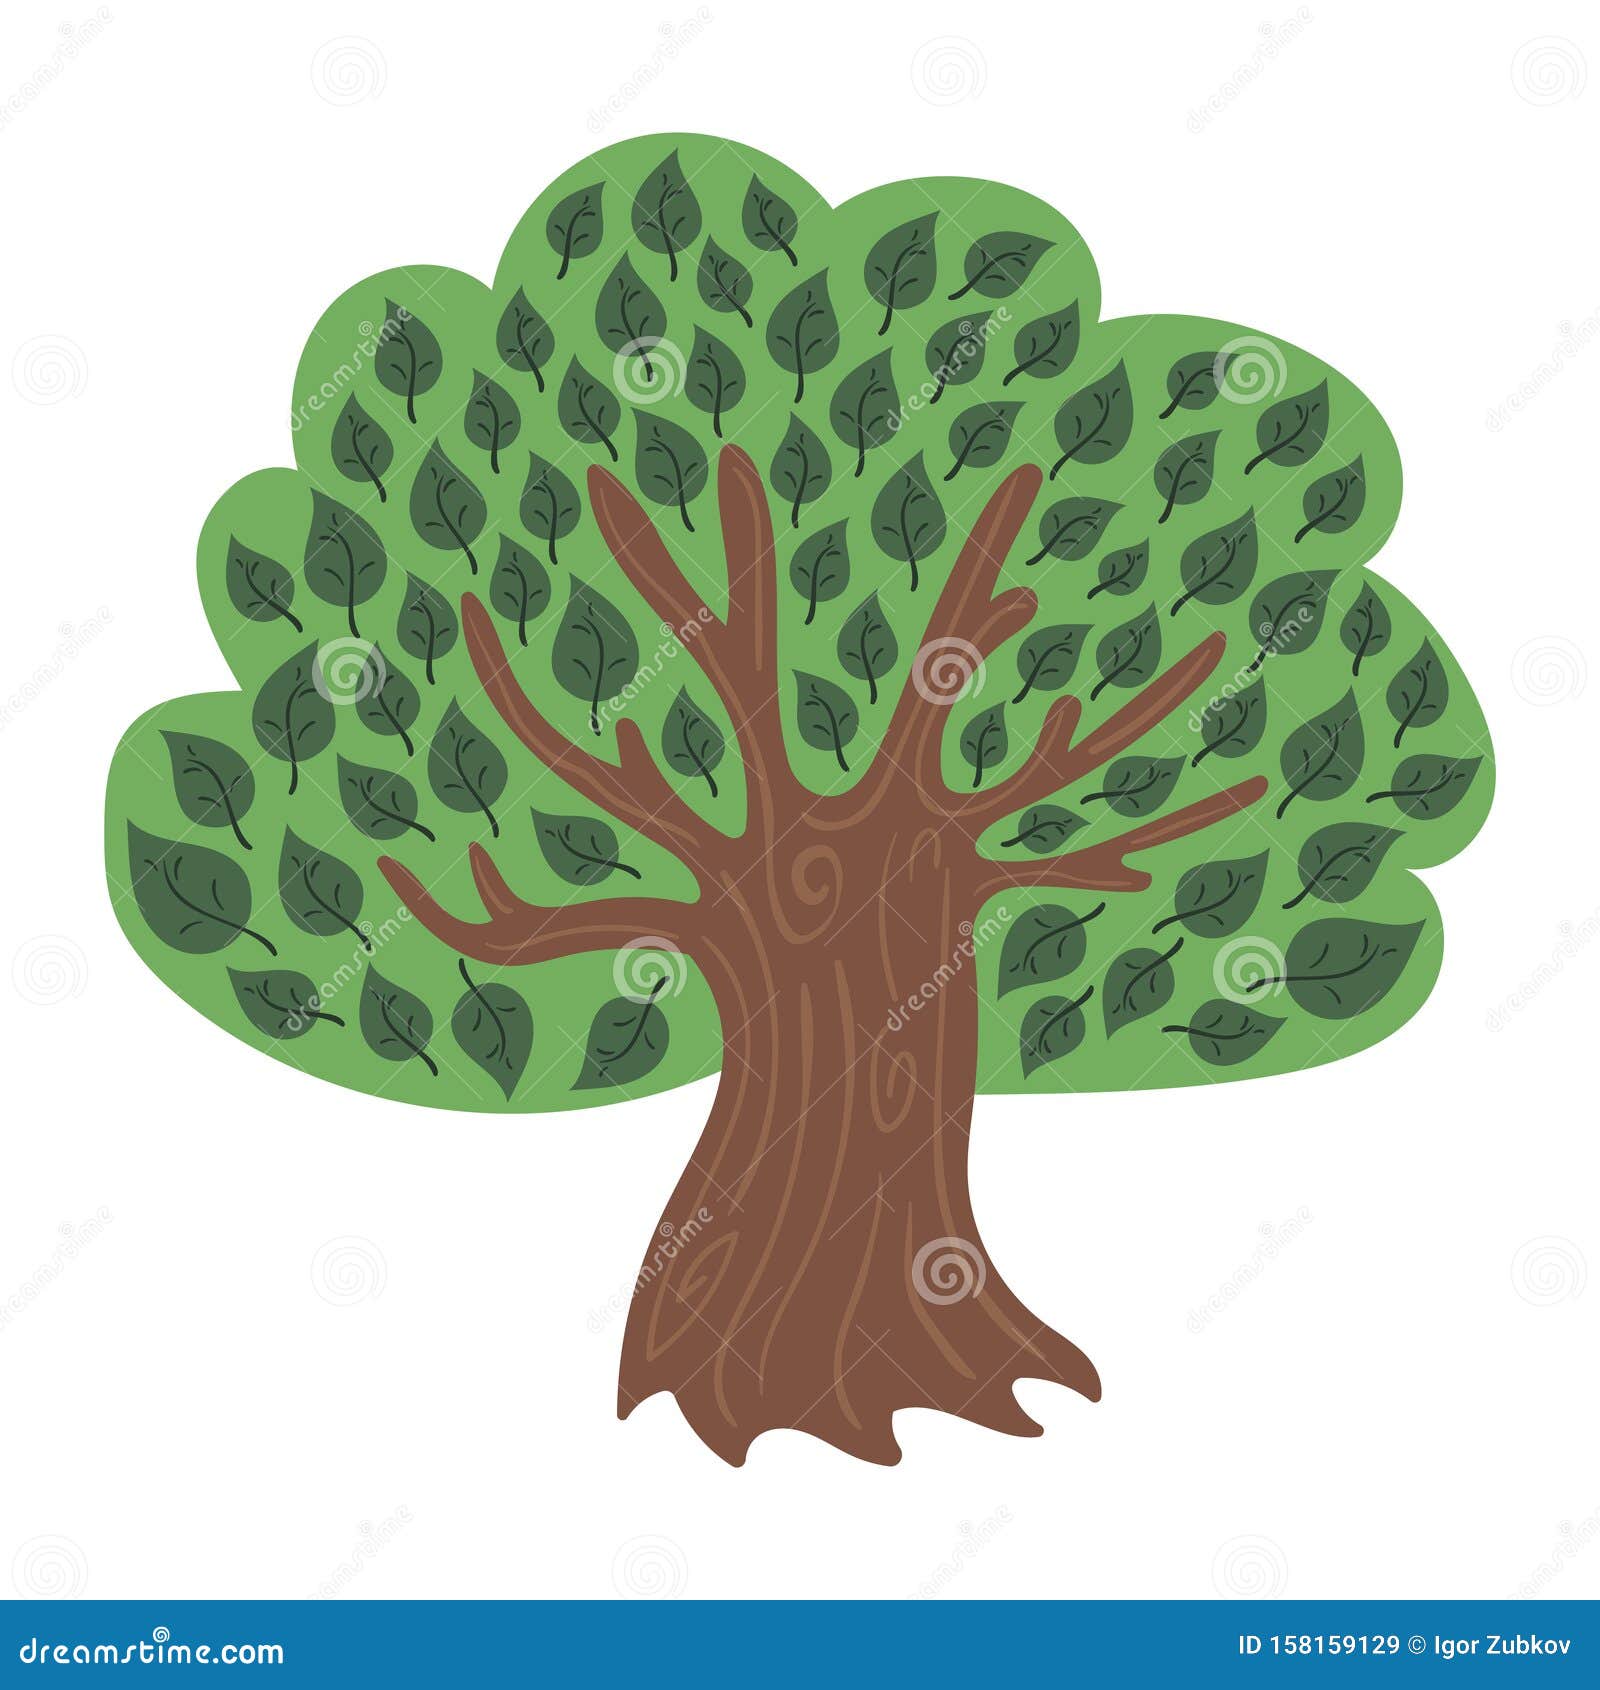 People tree drawing Vectors & Illustrations for Free Download | Freepik-saigonsouth.com.vn